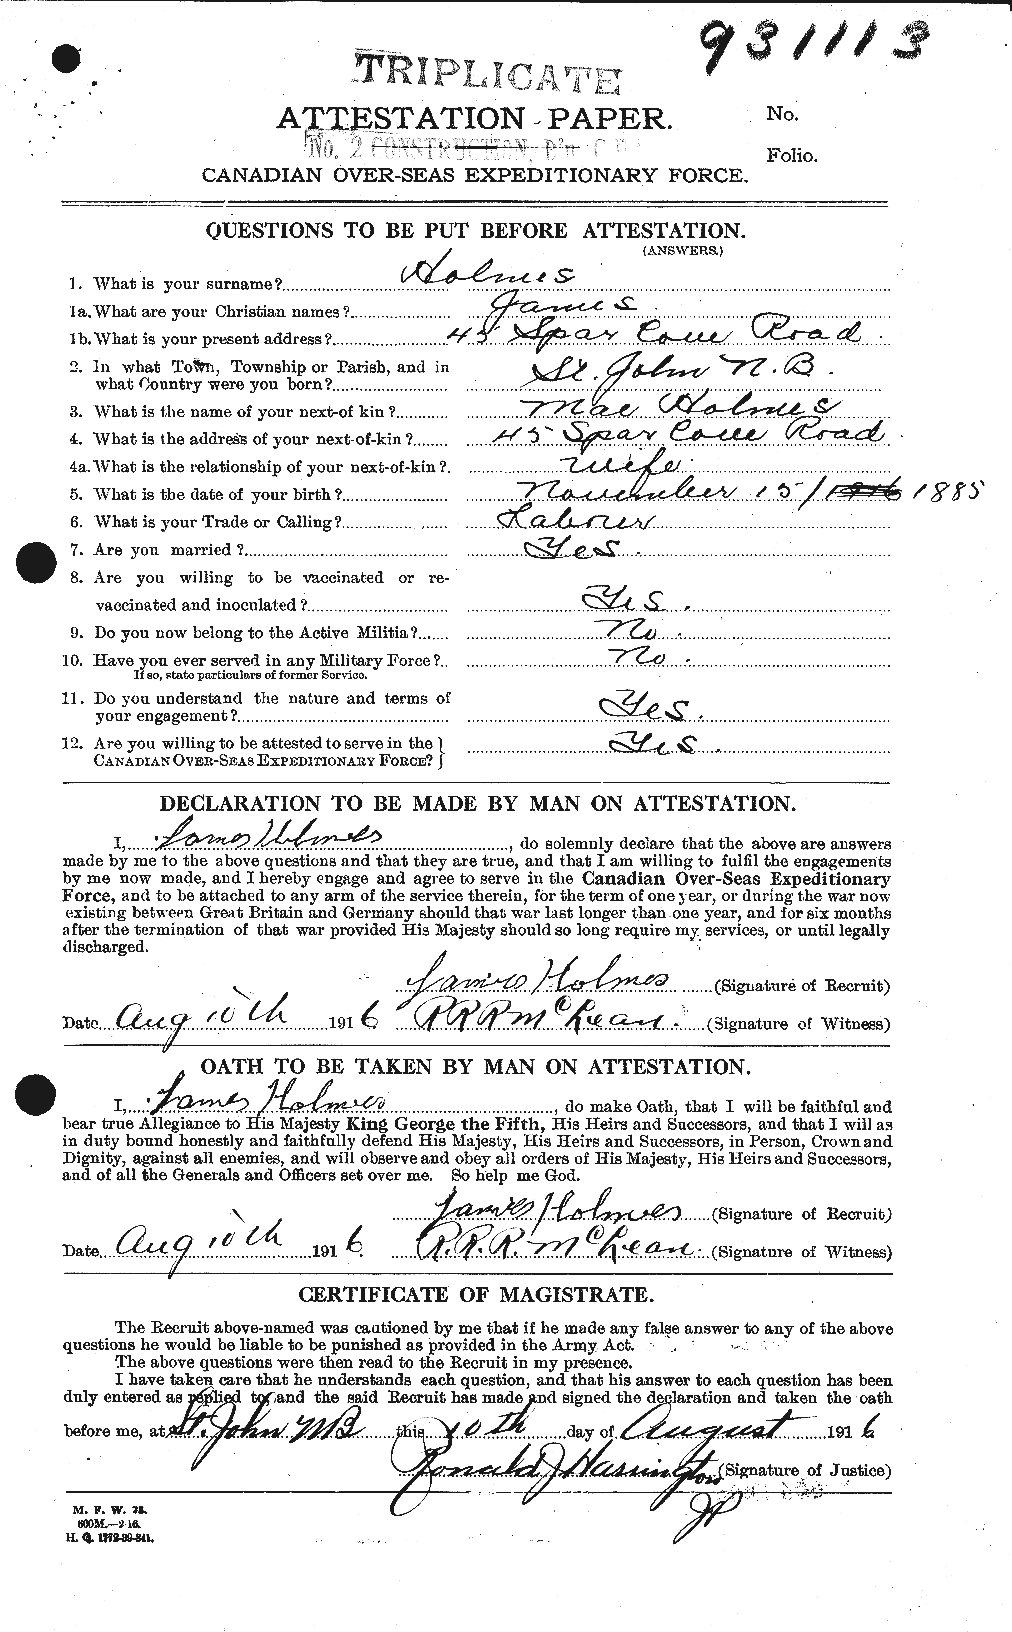 Personnel Records of the First World War - CEF 401761a